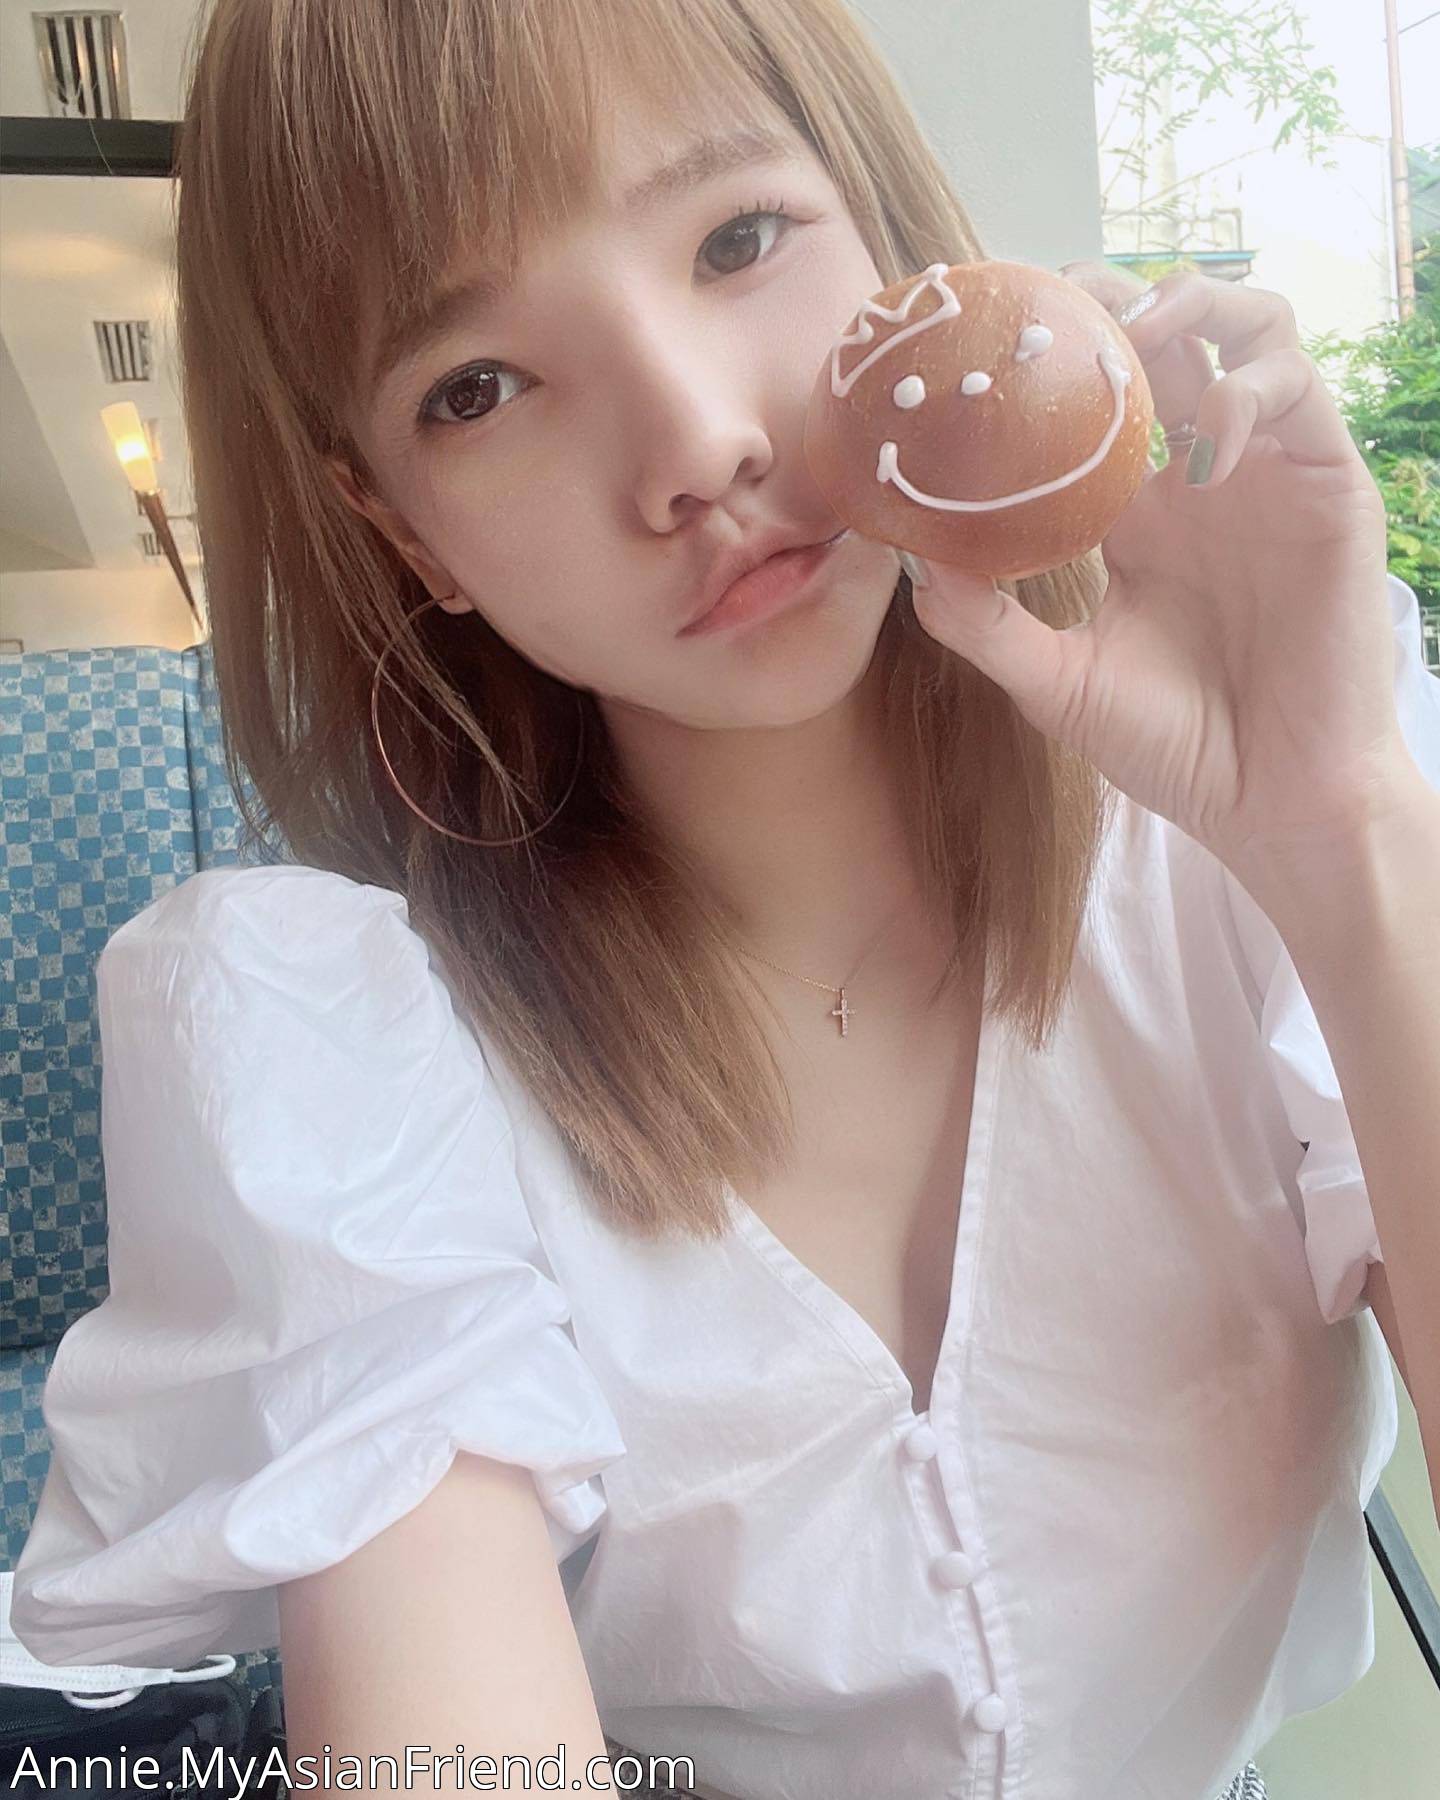 Annie's personal blog photo 1 added Wednesday the 21st of September 2022